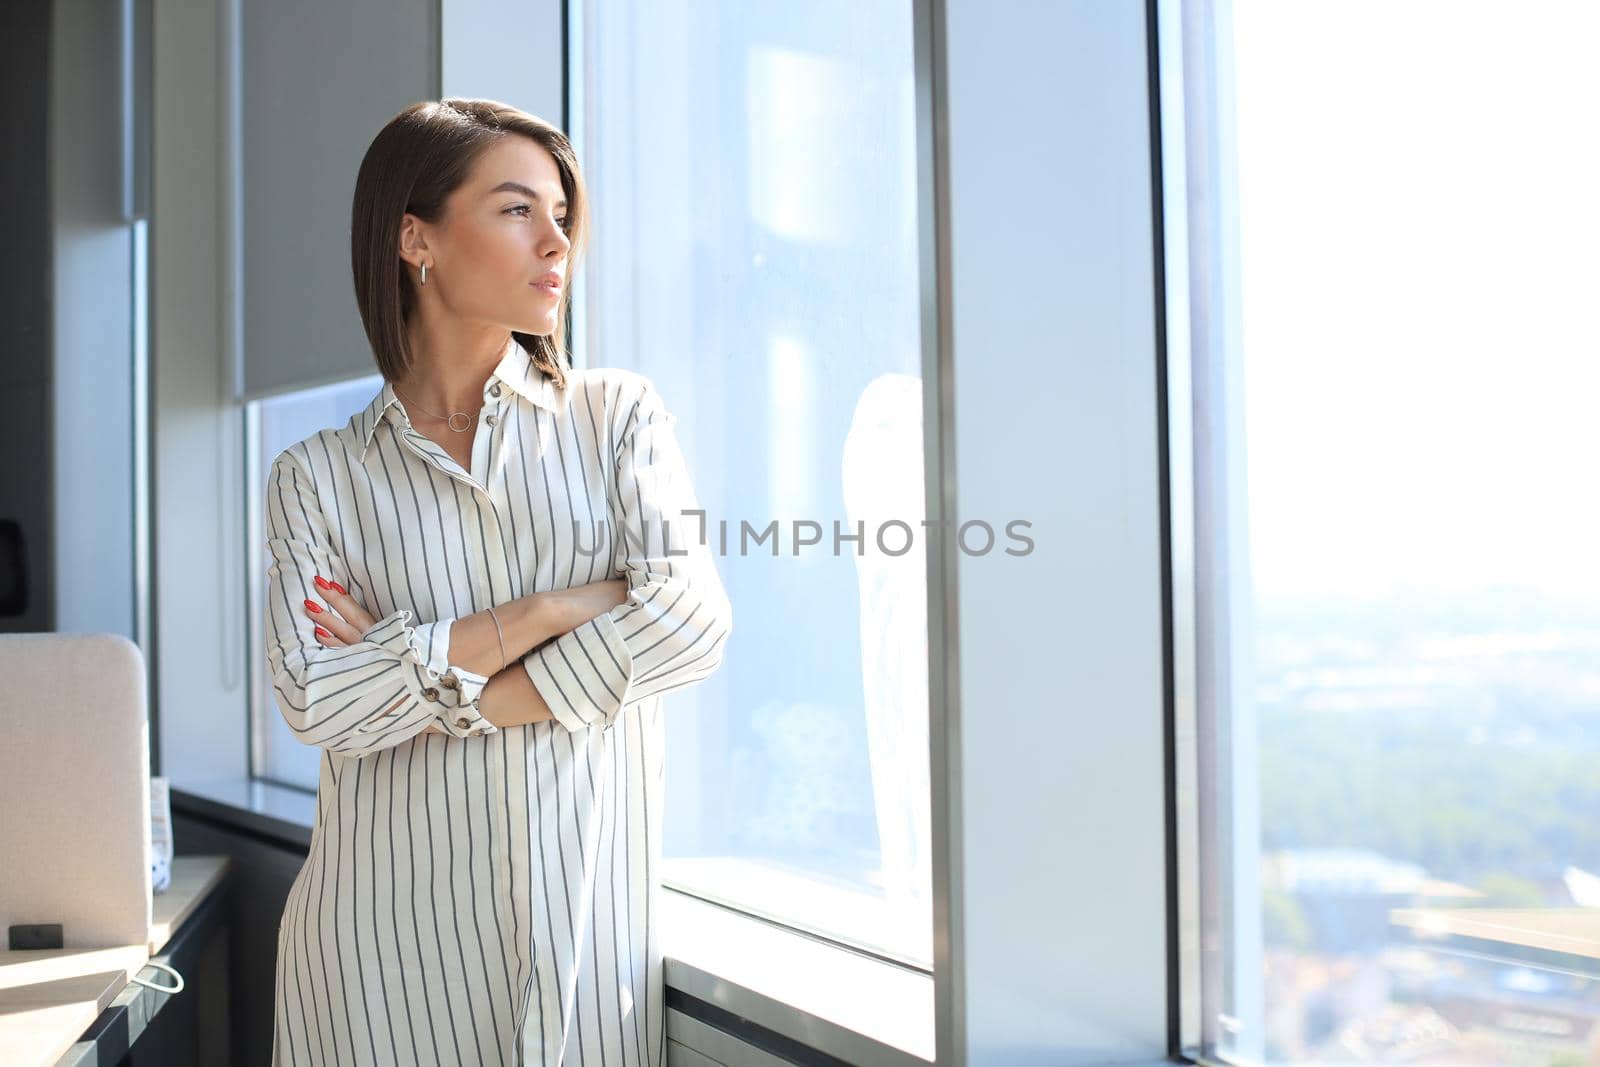 Attractive business woman in smart casual wear looking away and smiling while standing in the office.